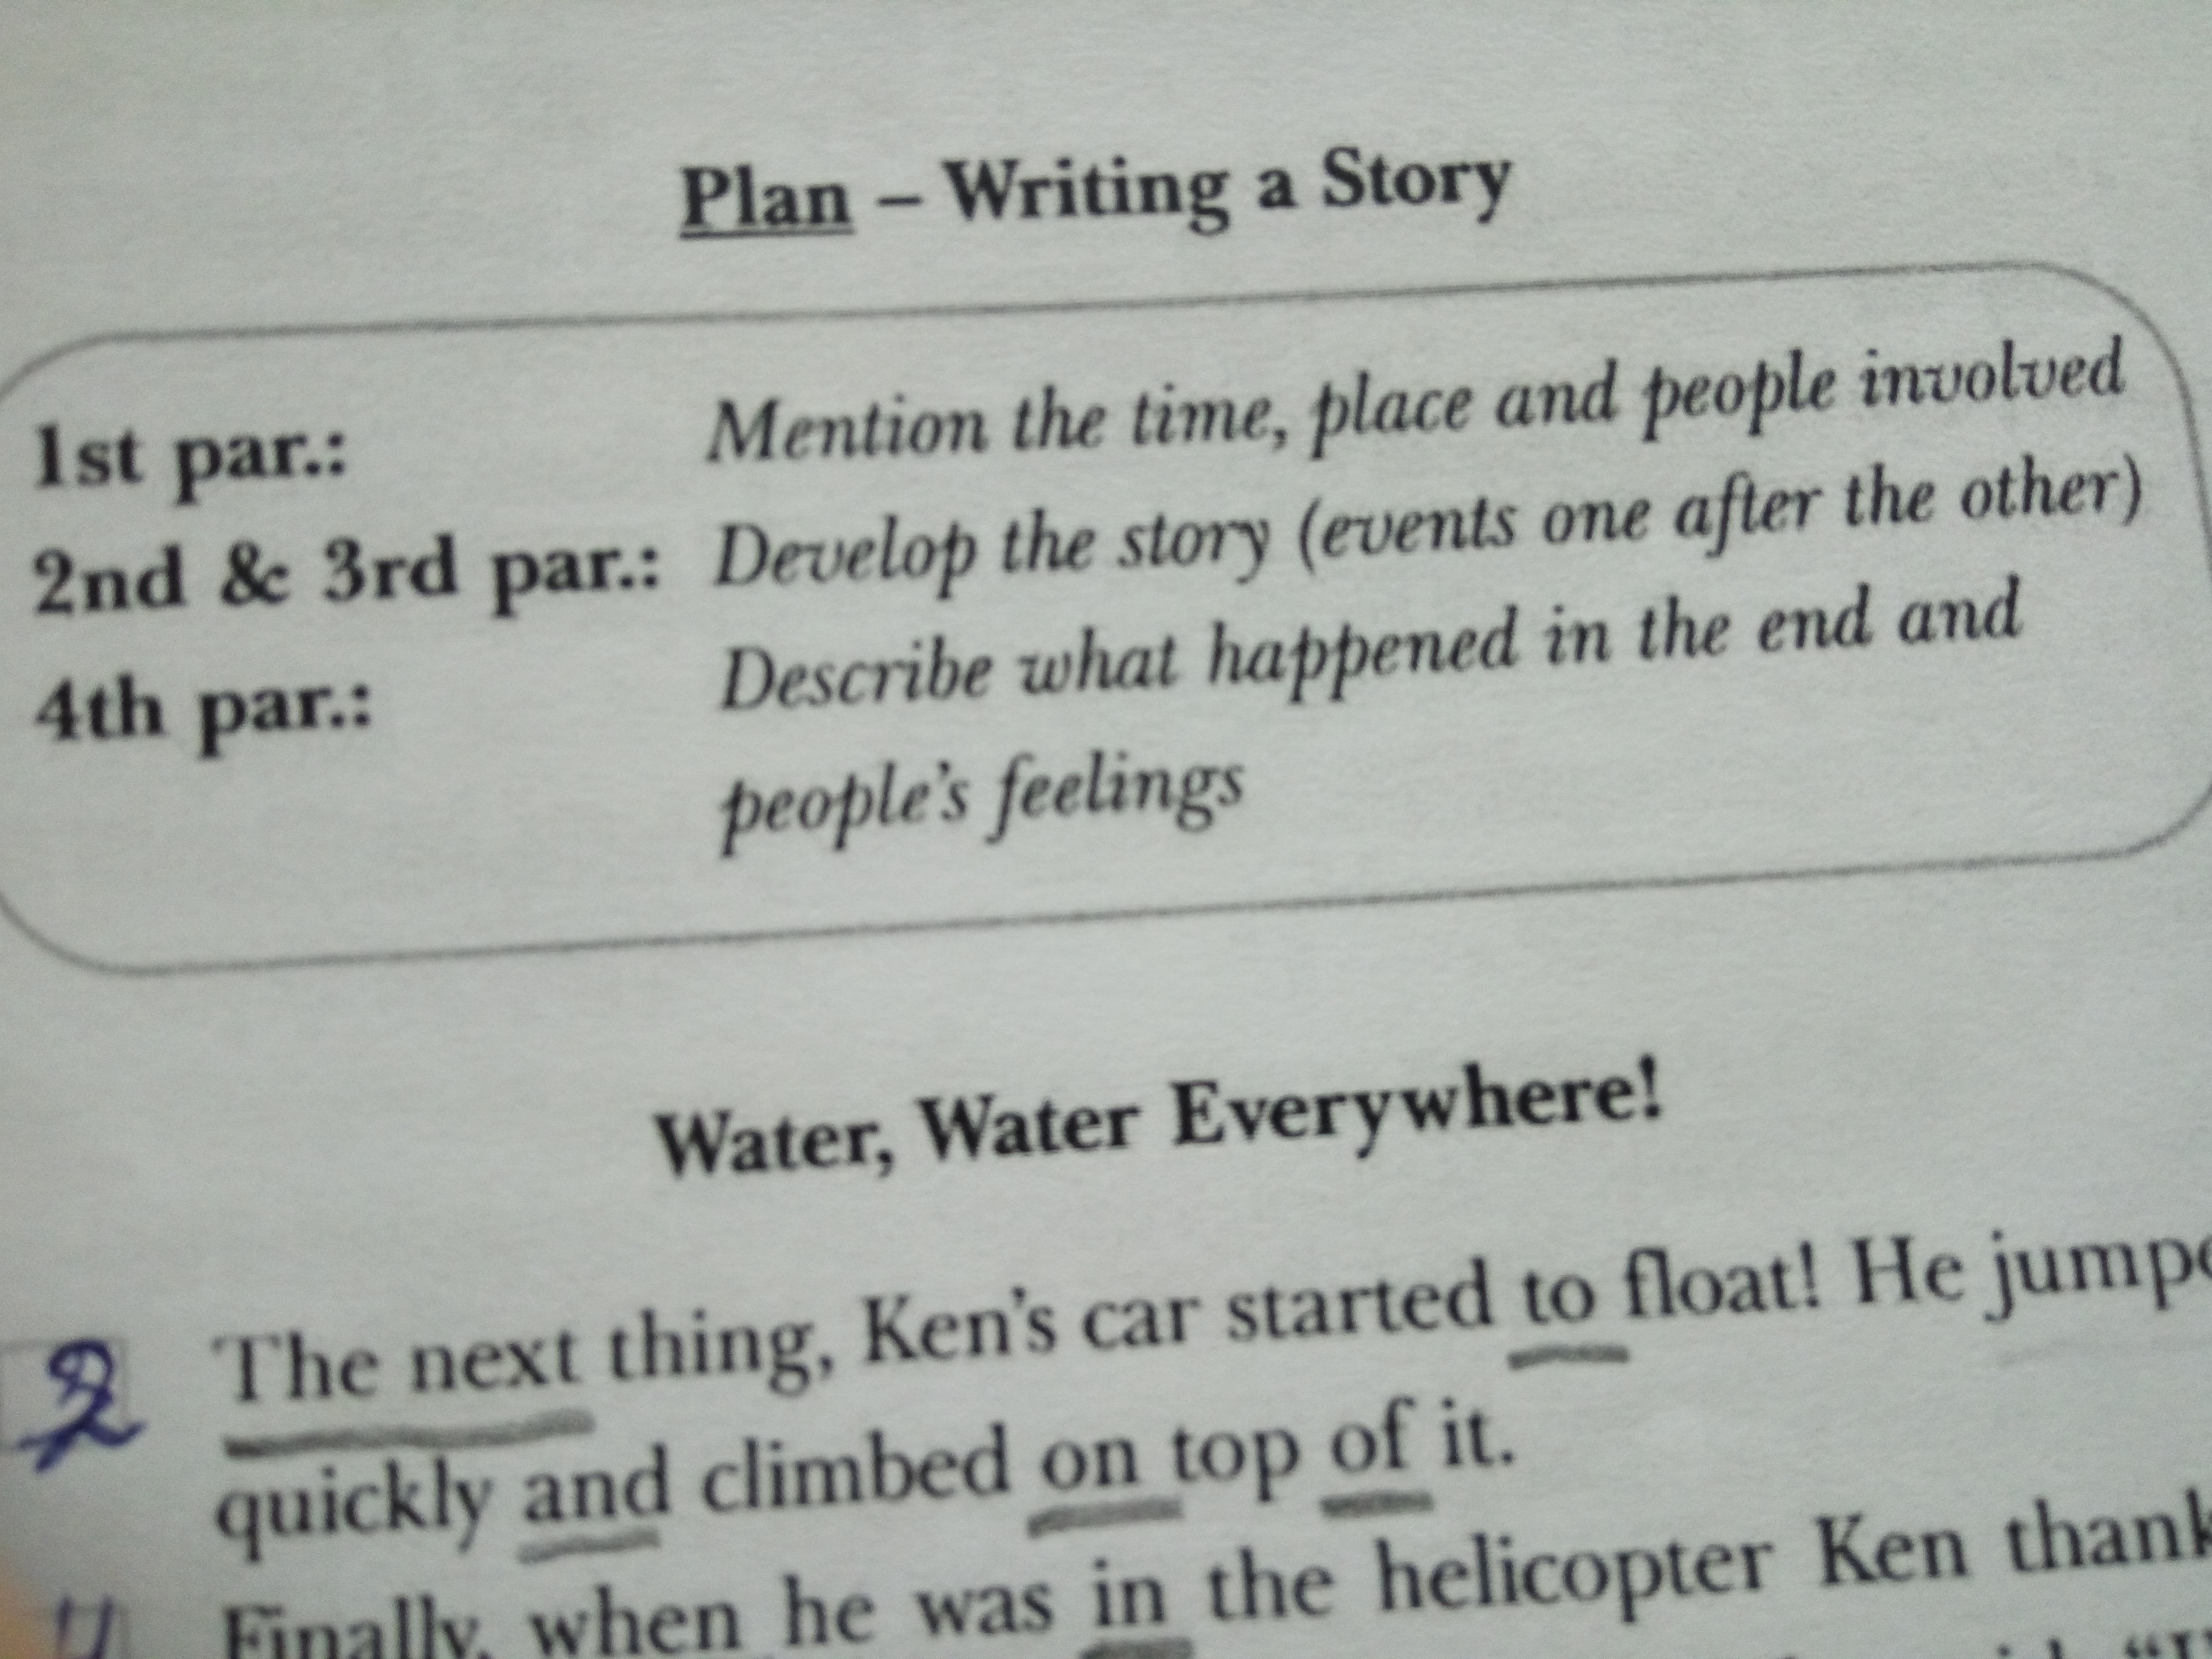 Writing a story 9 класс. Writing stories. Read the story and put the paragraphs in the correct order 7 класс. Read the story and put the paragraphs in the correct order. Writing a story plan